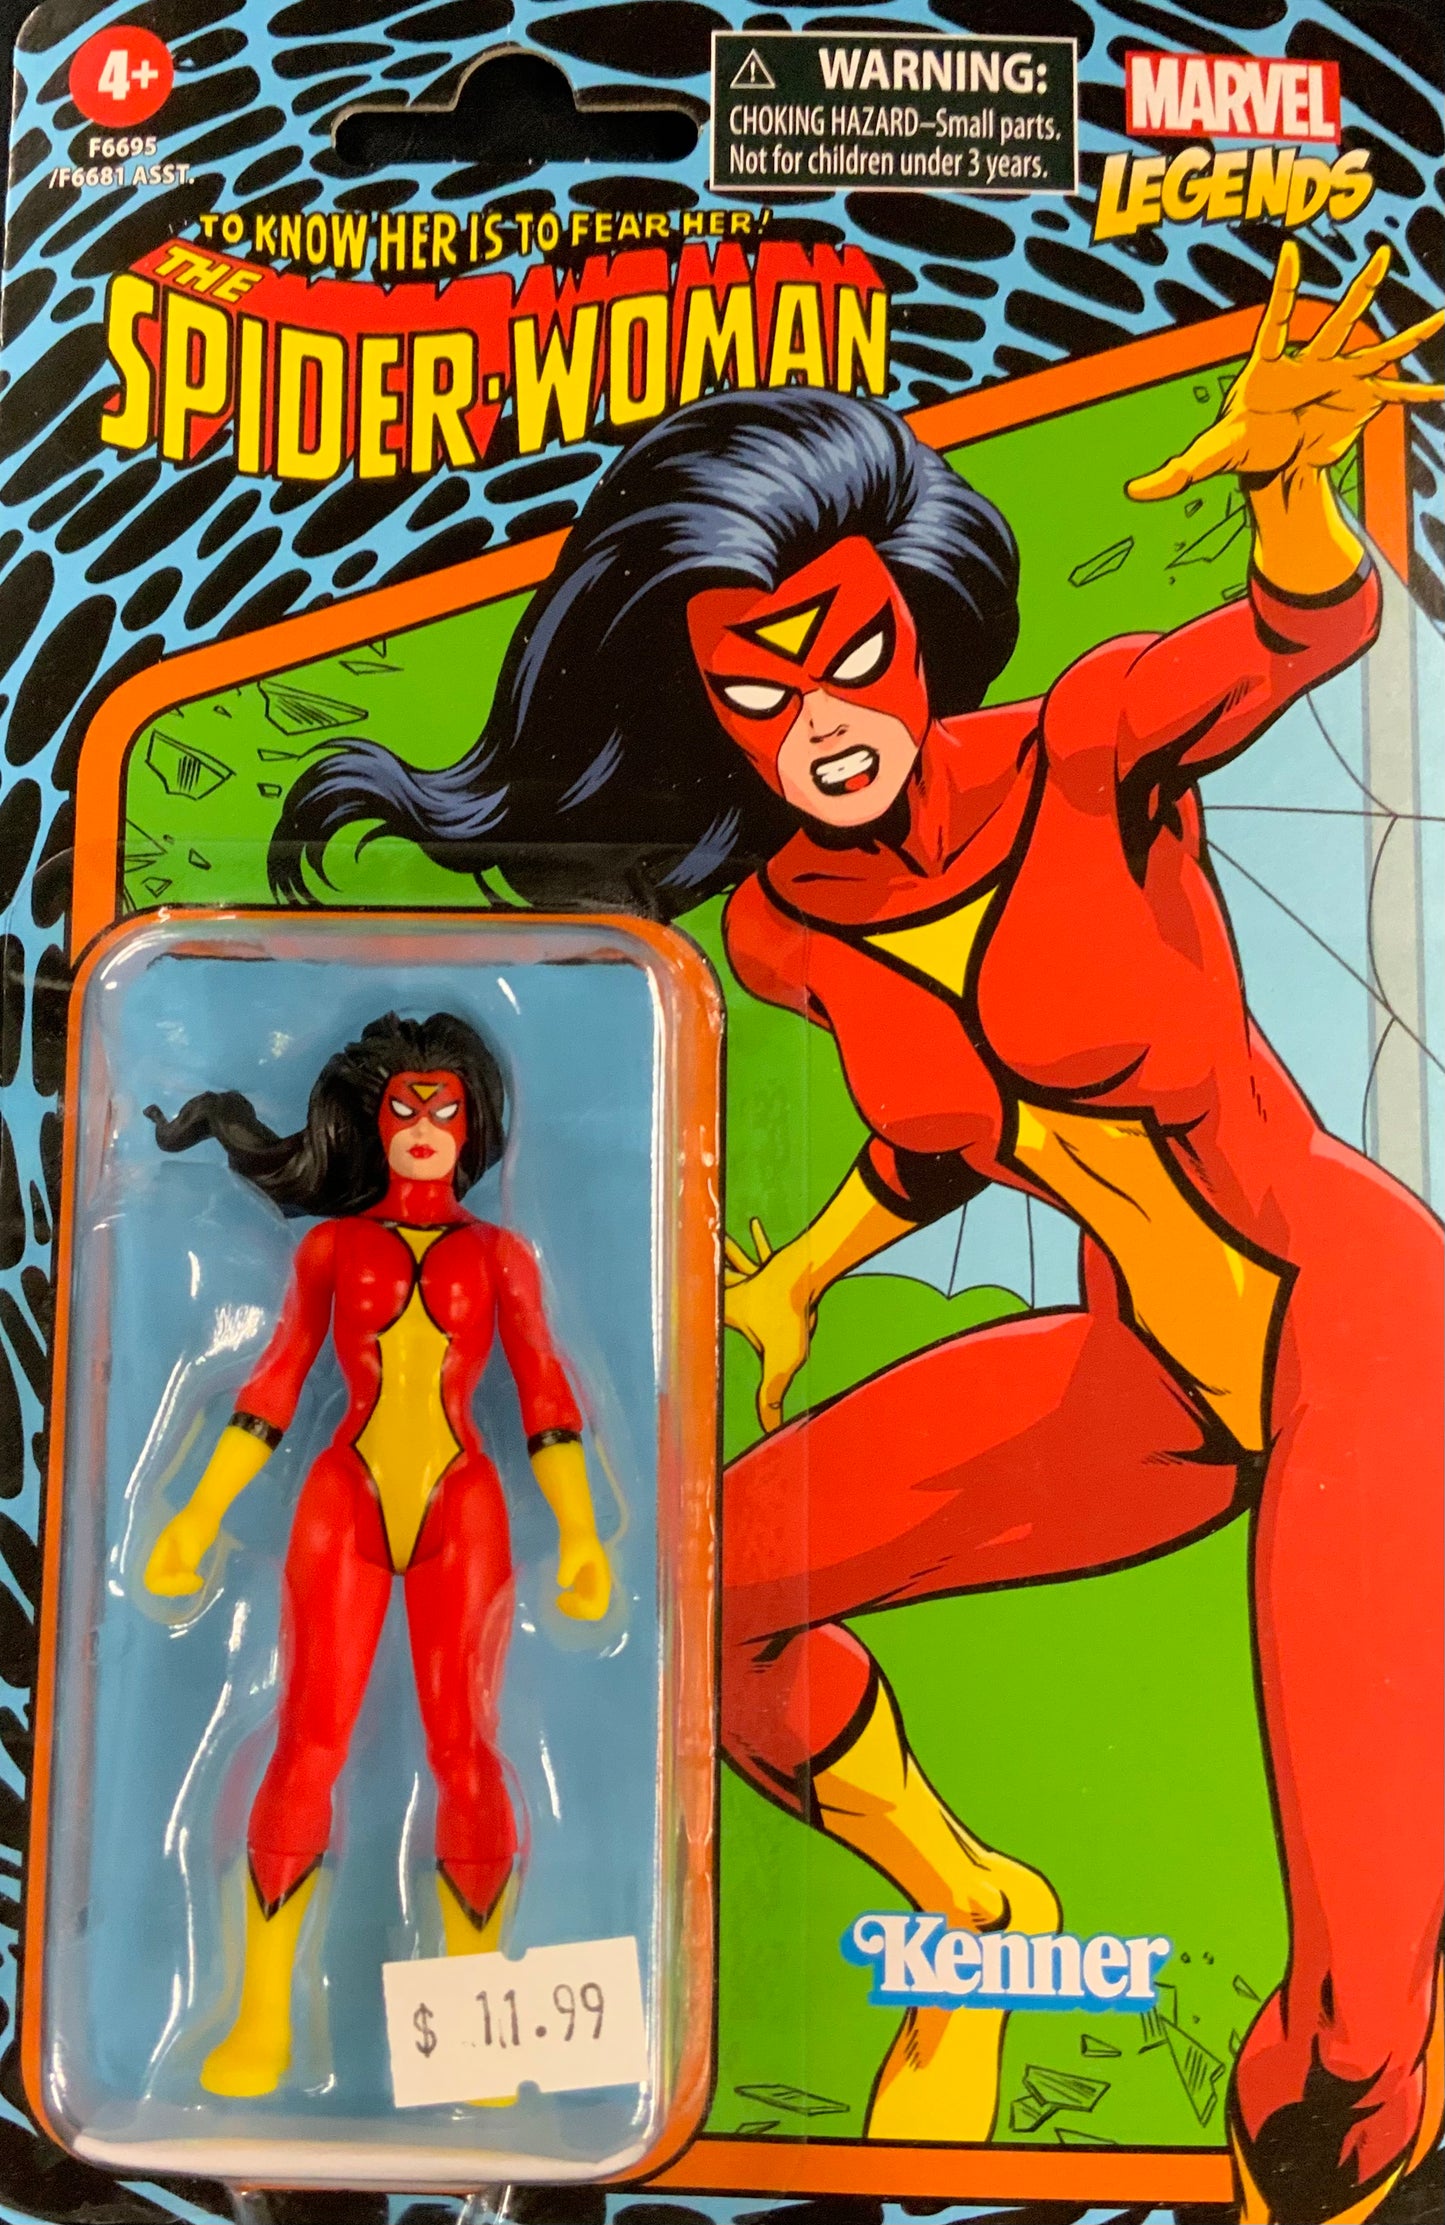 The Spider-Woman Action Figure